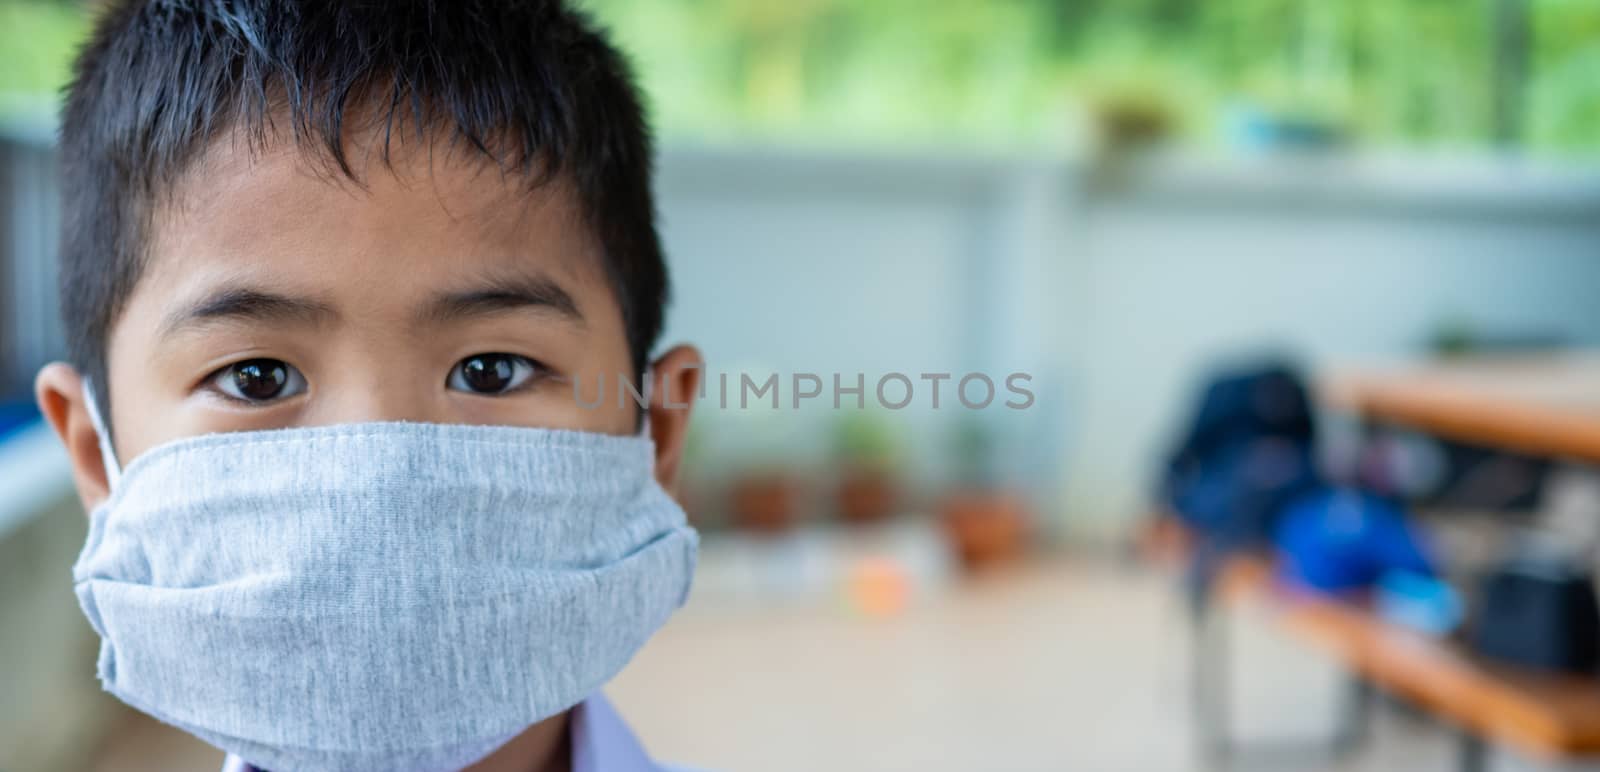 Close-up portrait of a cute boy wearing a protective mask and he is looking at the camera.